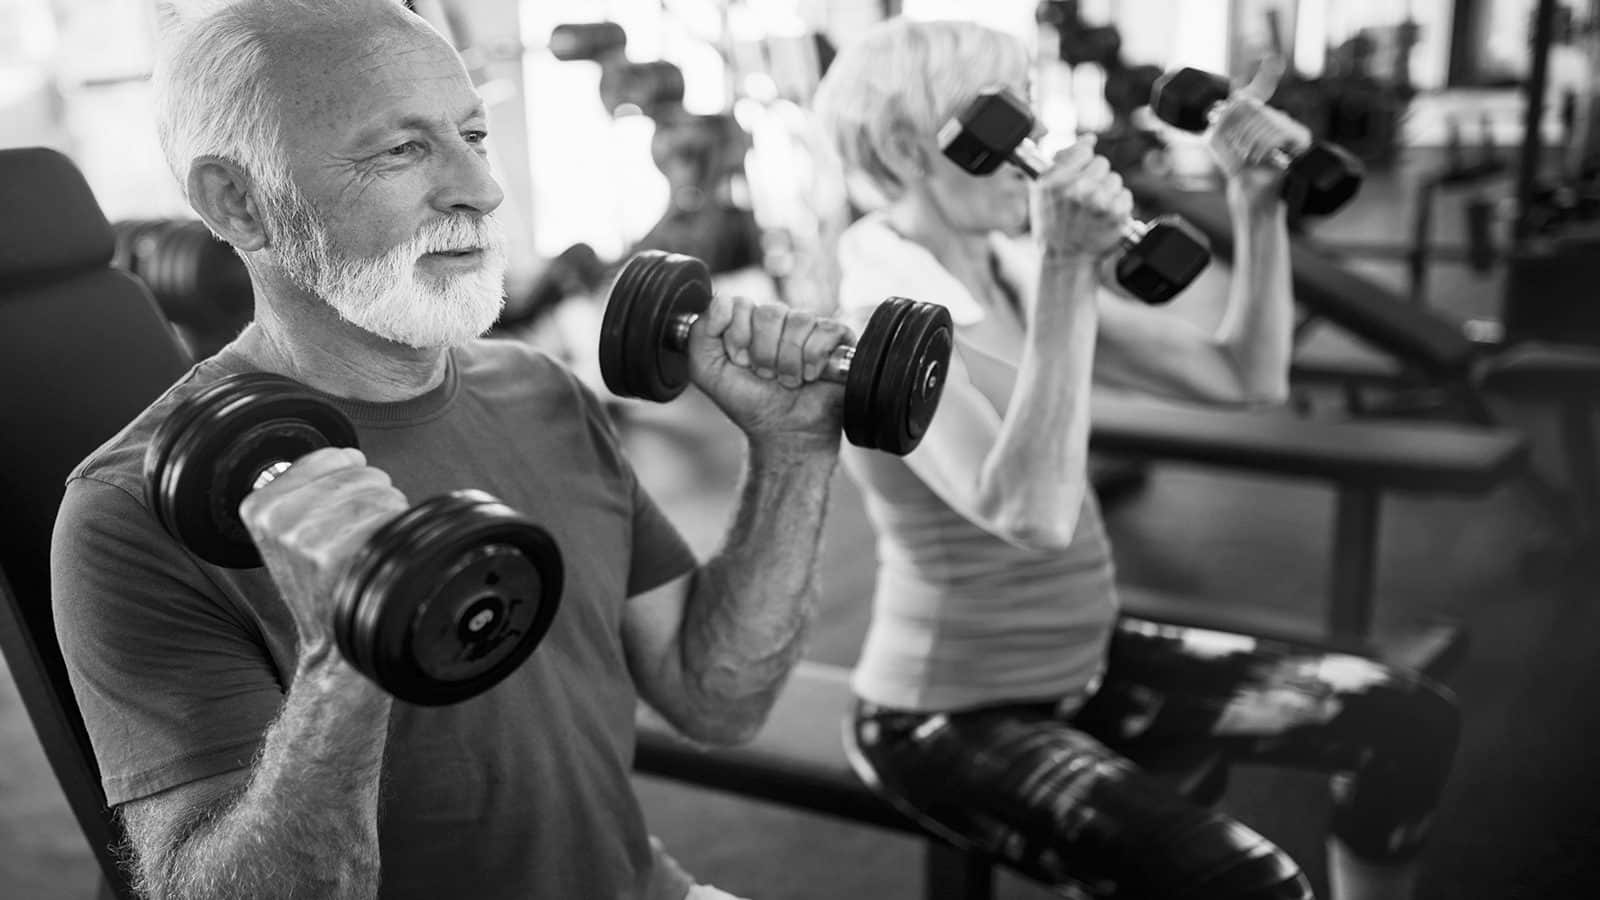 Study Confirms That Diet and Exercise Are Key to a Longer Life